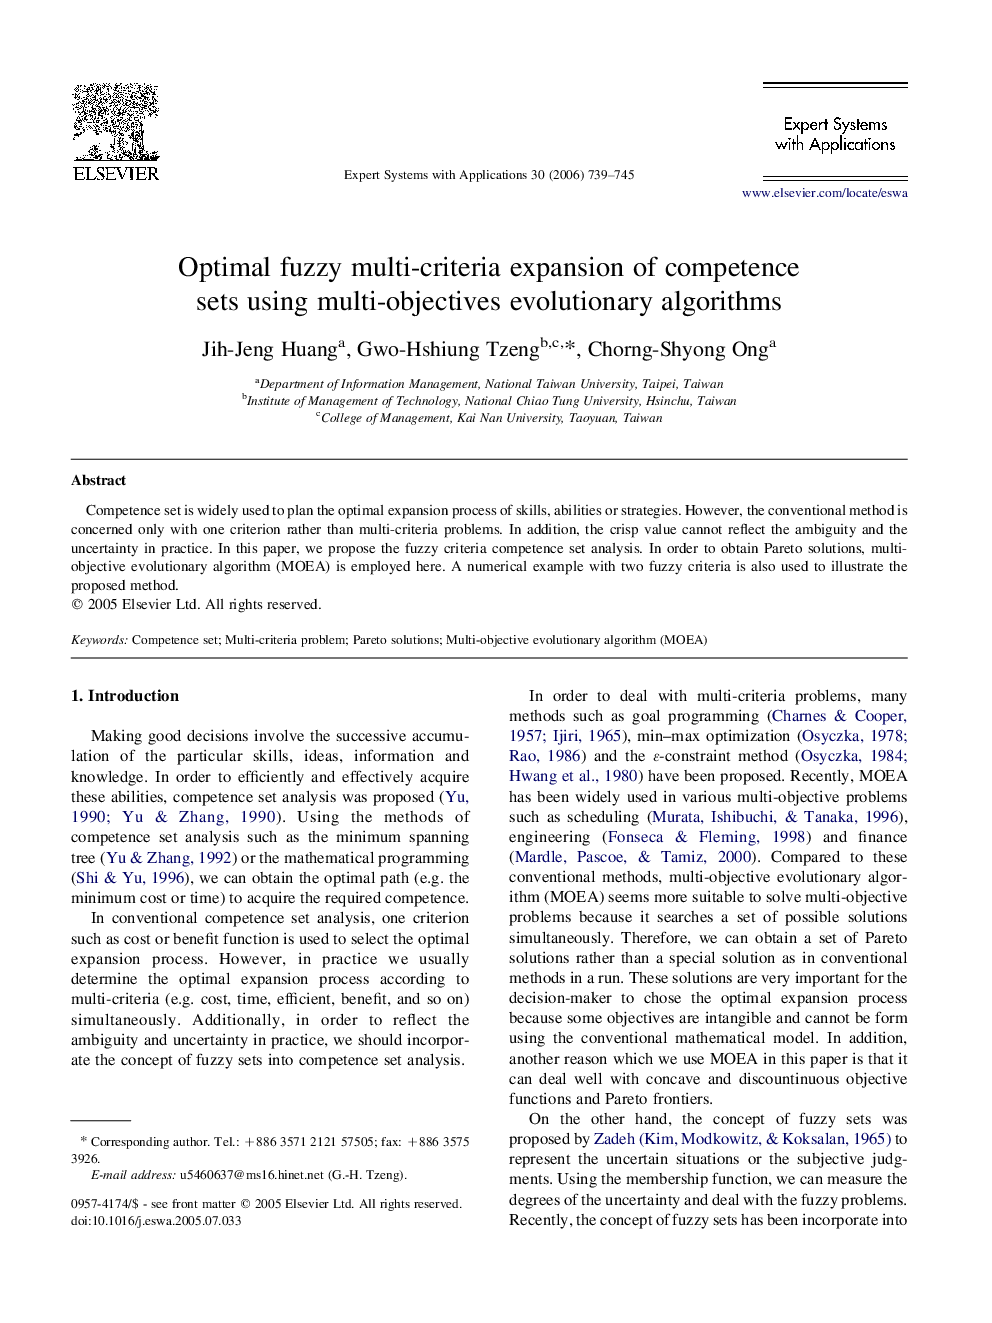 Optimal fuzzy multi-criteria expansion of competence sets using multi-objectives evolutionary algorithms